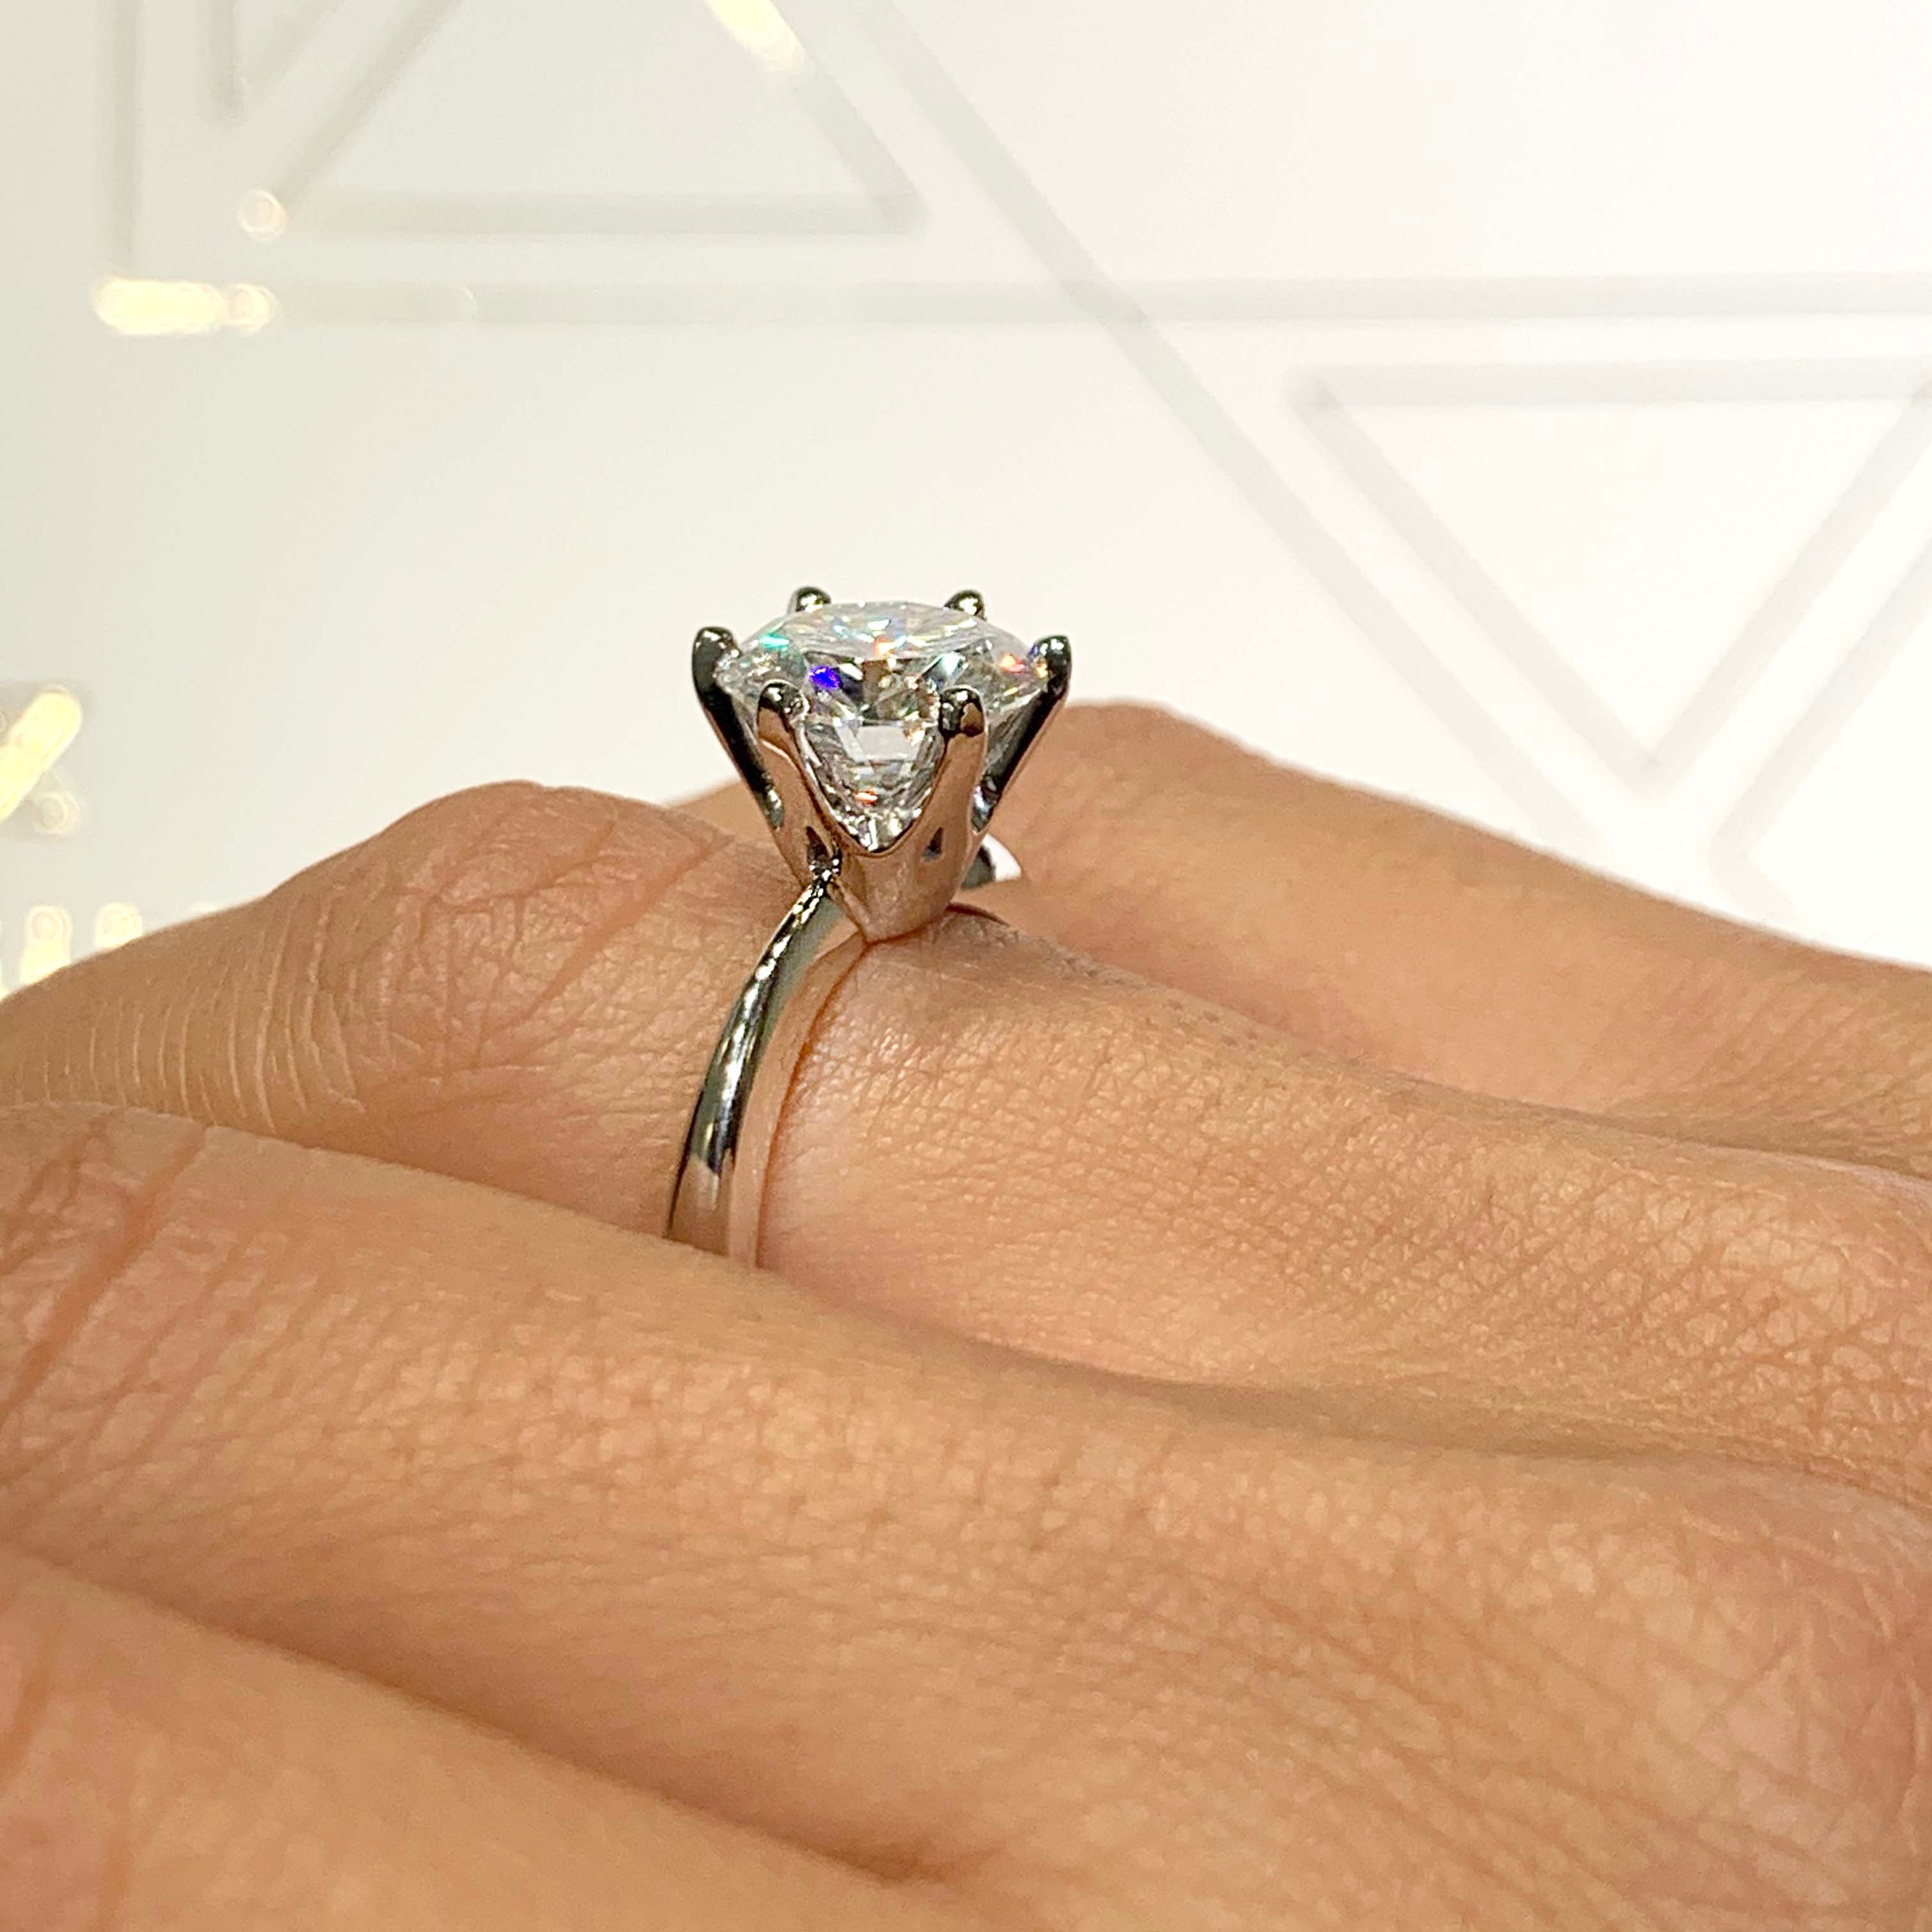 Check out our gorgeous vintage 1.4 ctw 3 stone diamond ring set in platinum  pair! 💎 Fits like a US 7.25 and can be resized! Paired with a… | Instagram